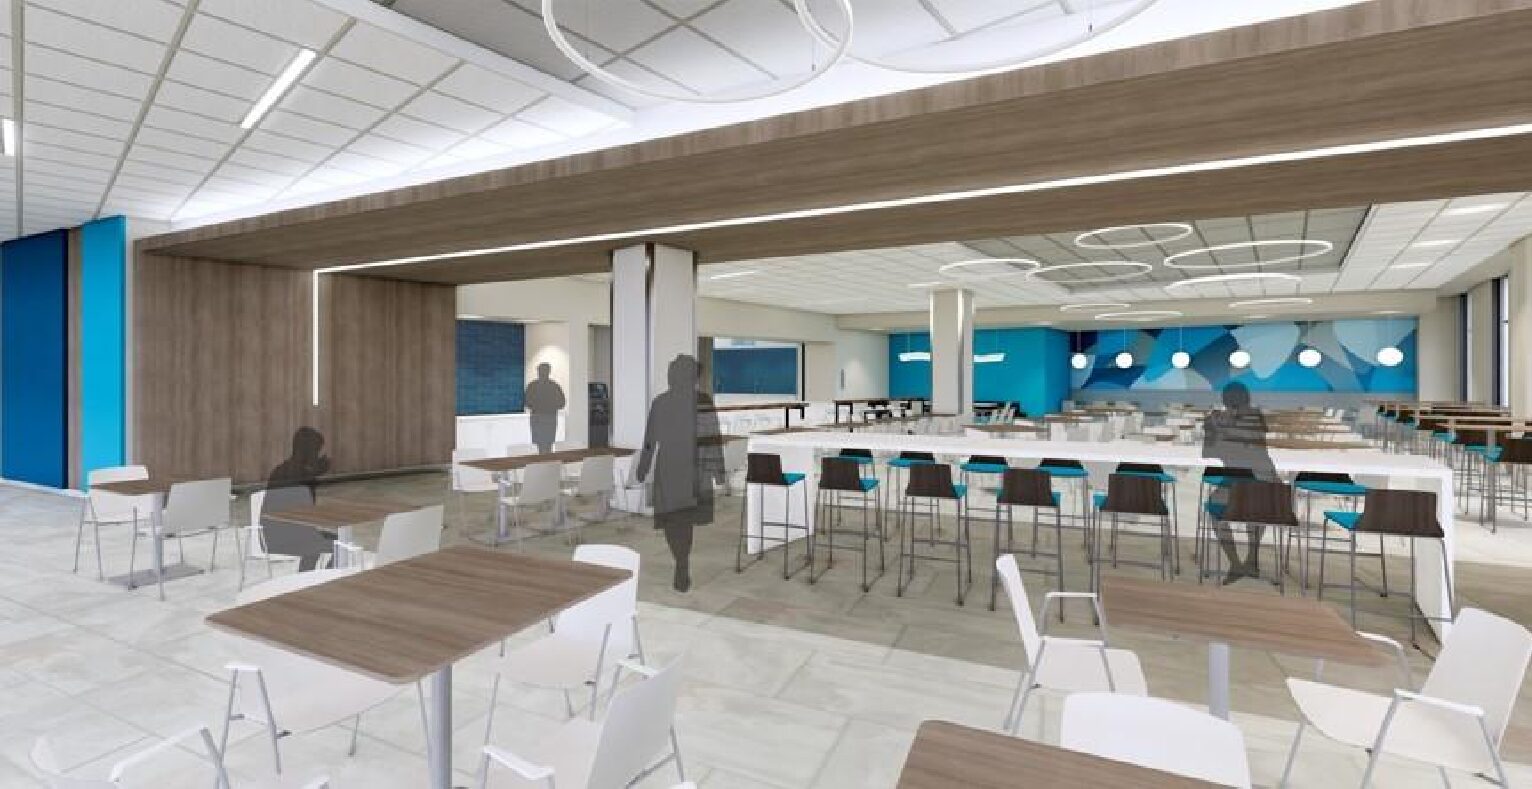 McLaren Greater Lansing’s new hospital cafeteria has a hospitality feel in a health care setting